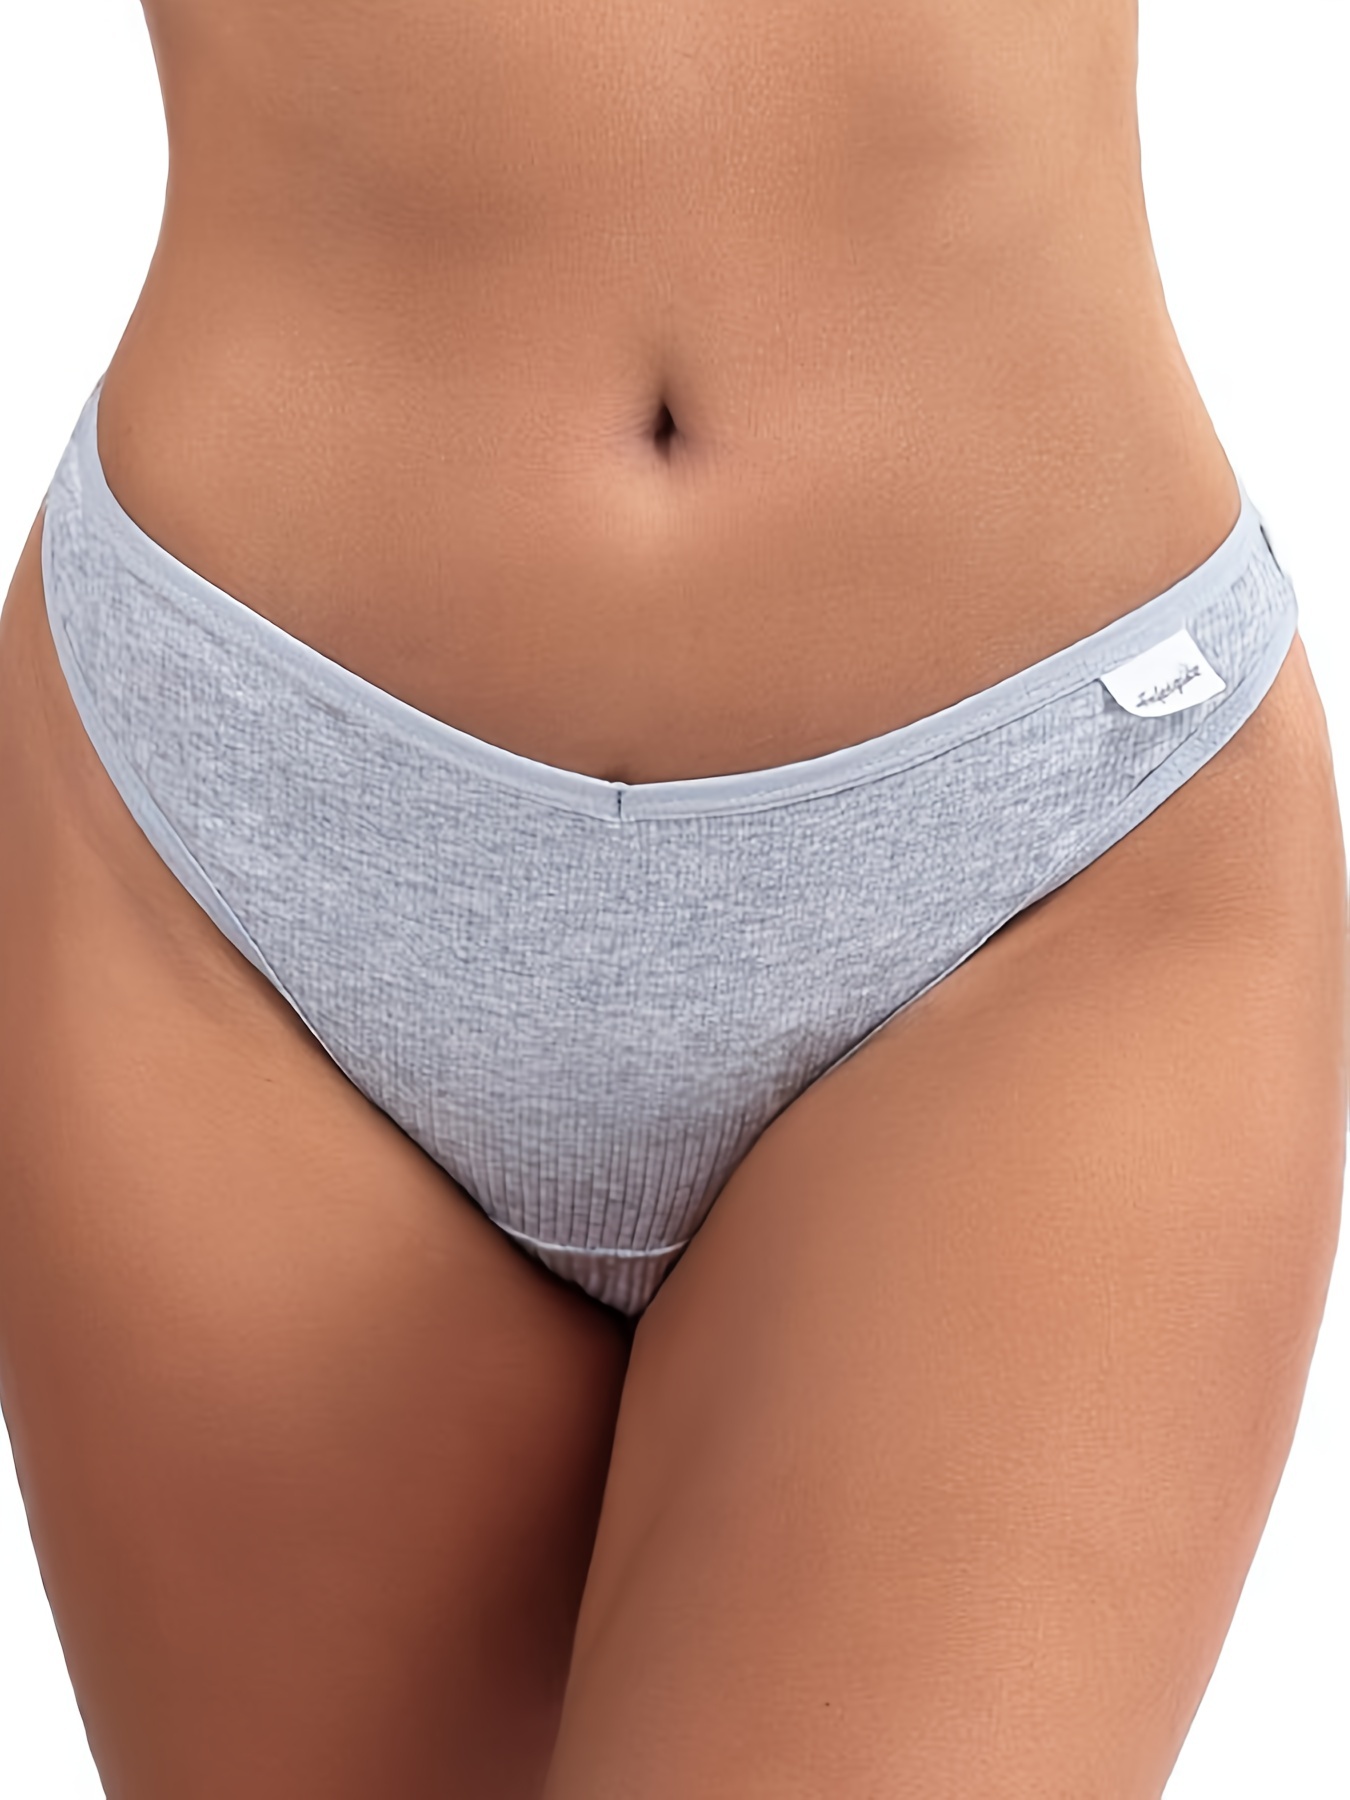 Stretch MID Rise Panty Smooth Plain Breathable Cotton Crotch